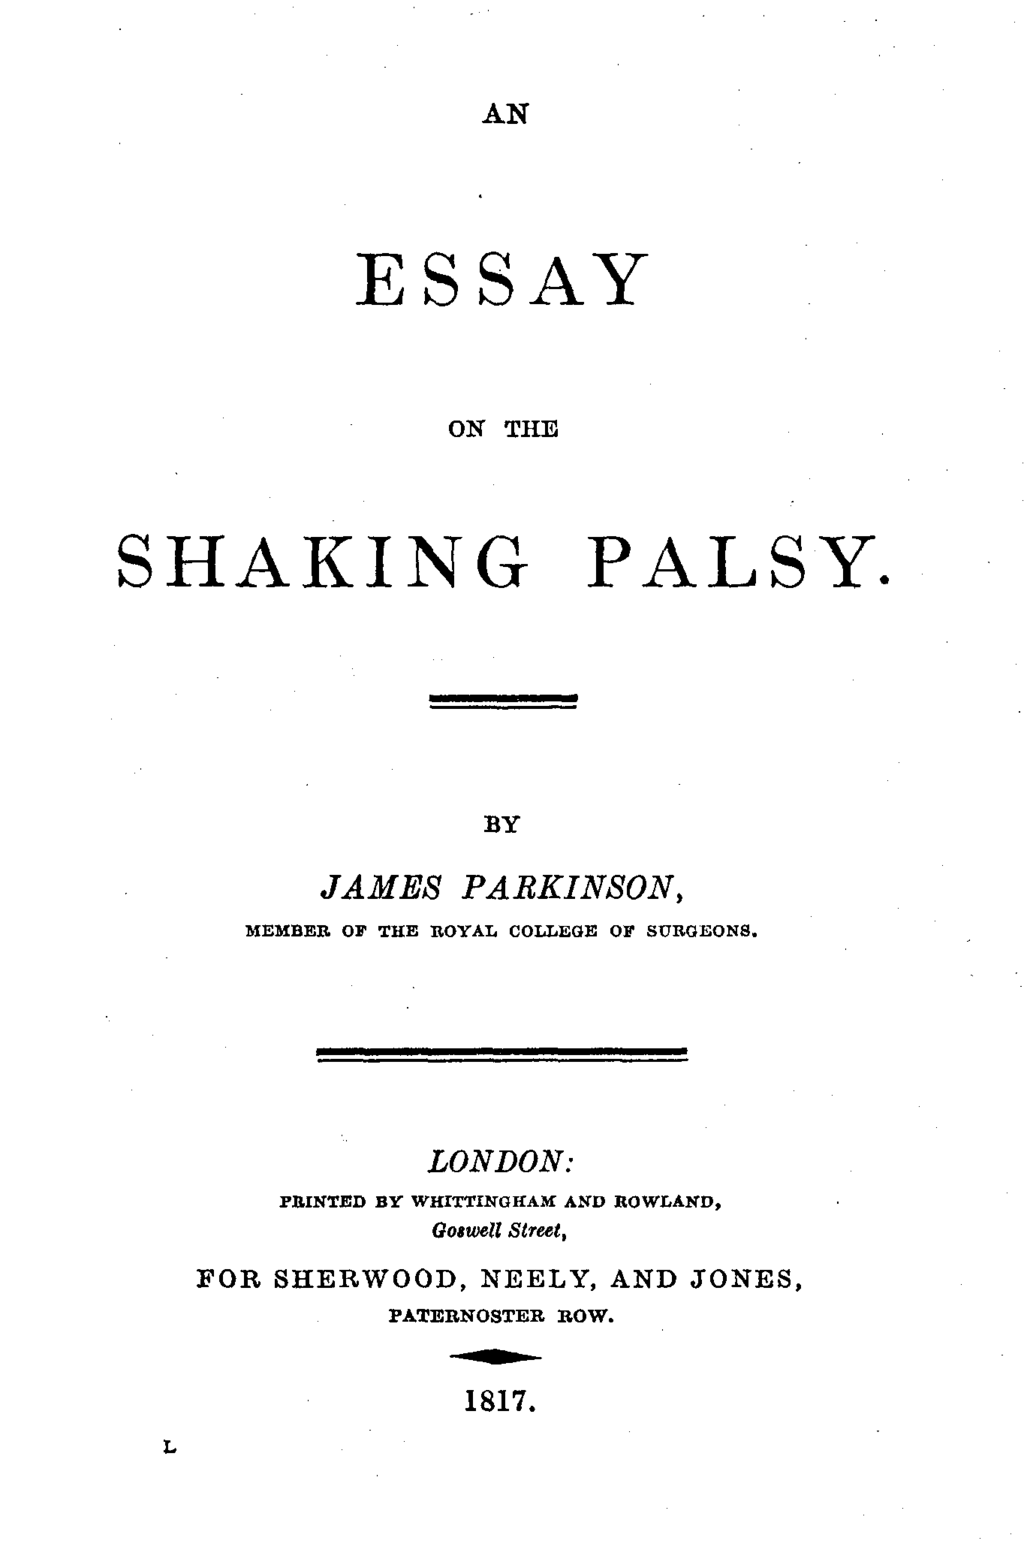 Title page for an essay